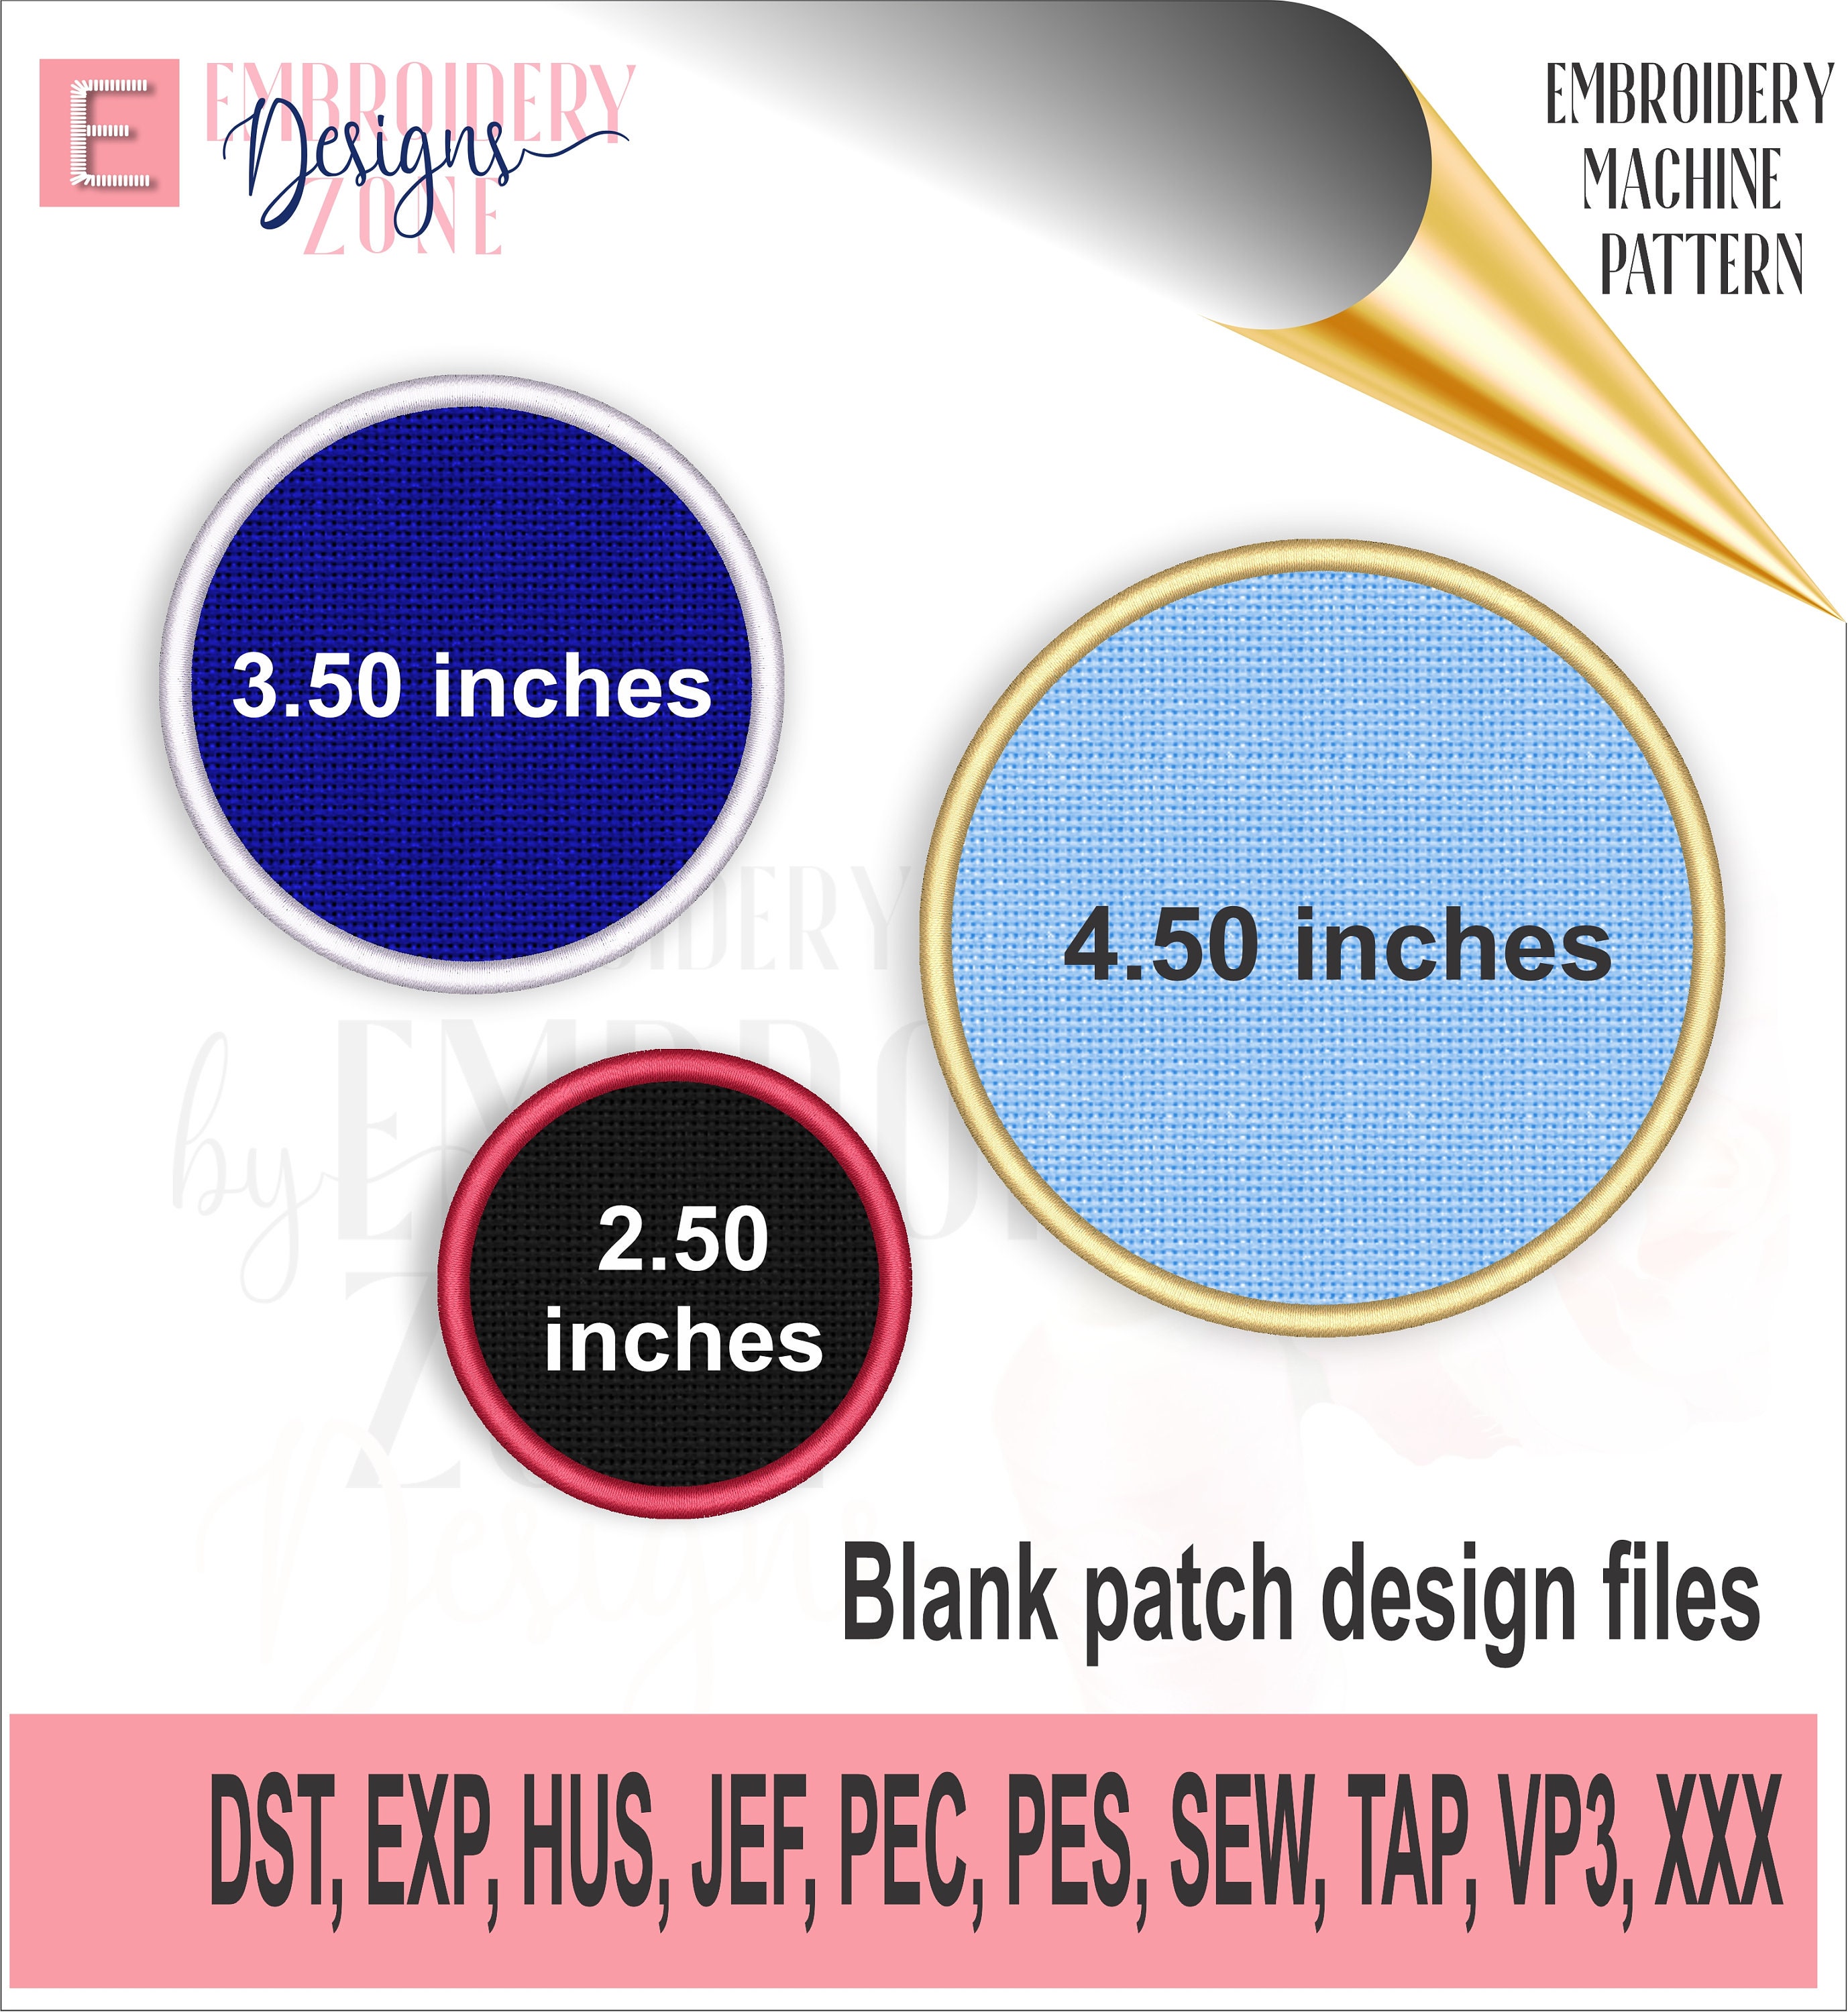 ROUND 10 GRAY BLANK sew on patch (4040) Large Blank Patches (H47)